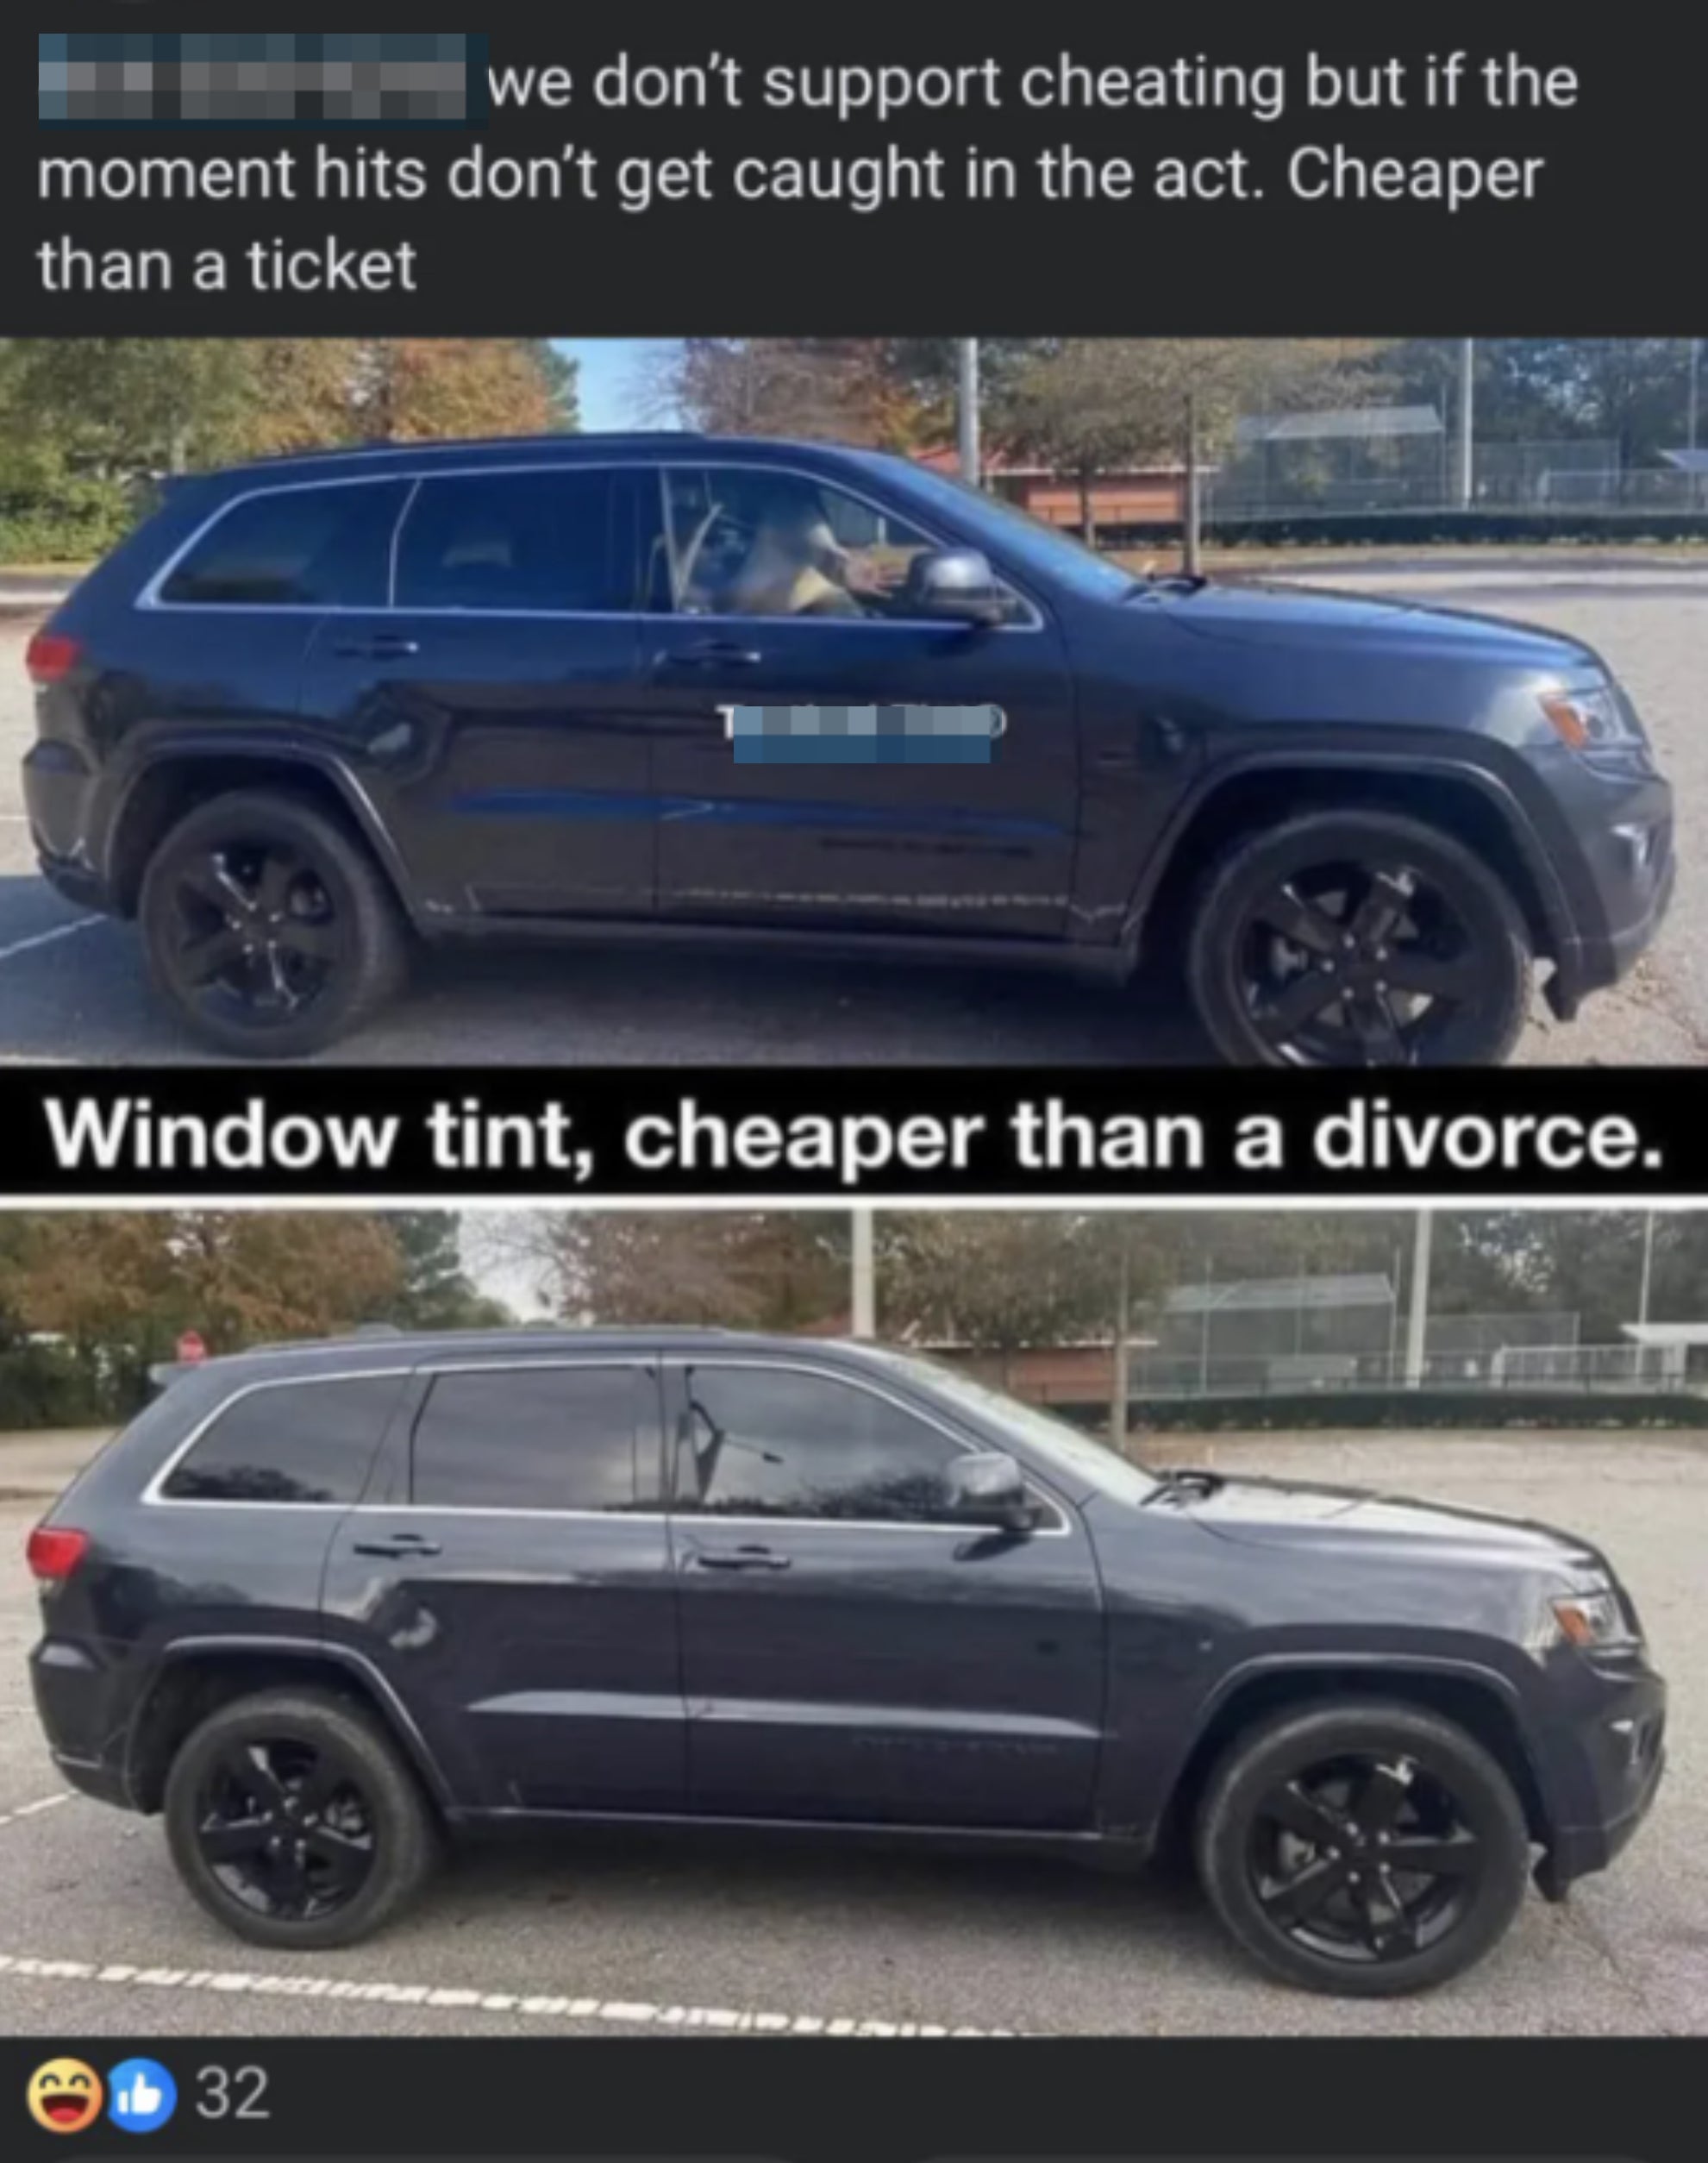 Advertisement showcasing a car with tinted windows, alongside a slogan about window tinting being cheaper than a divorce